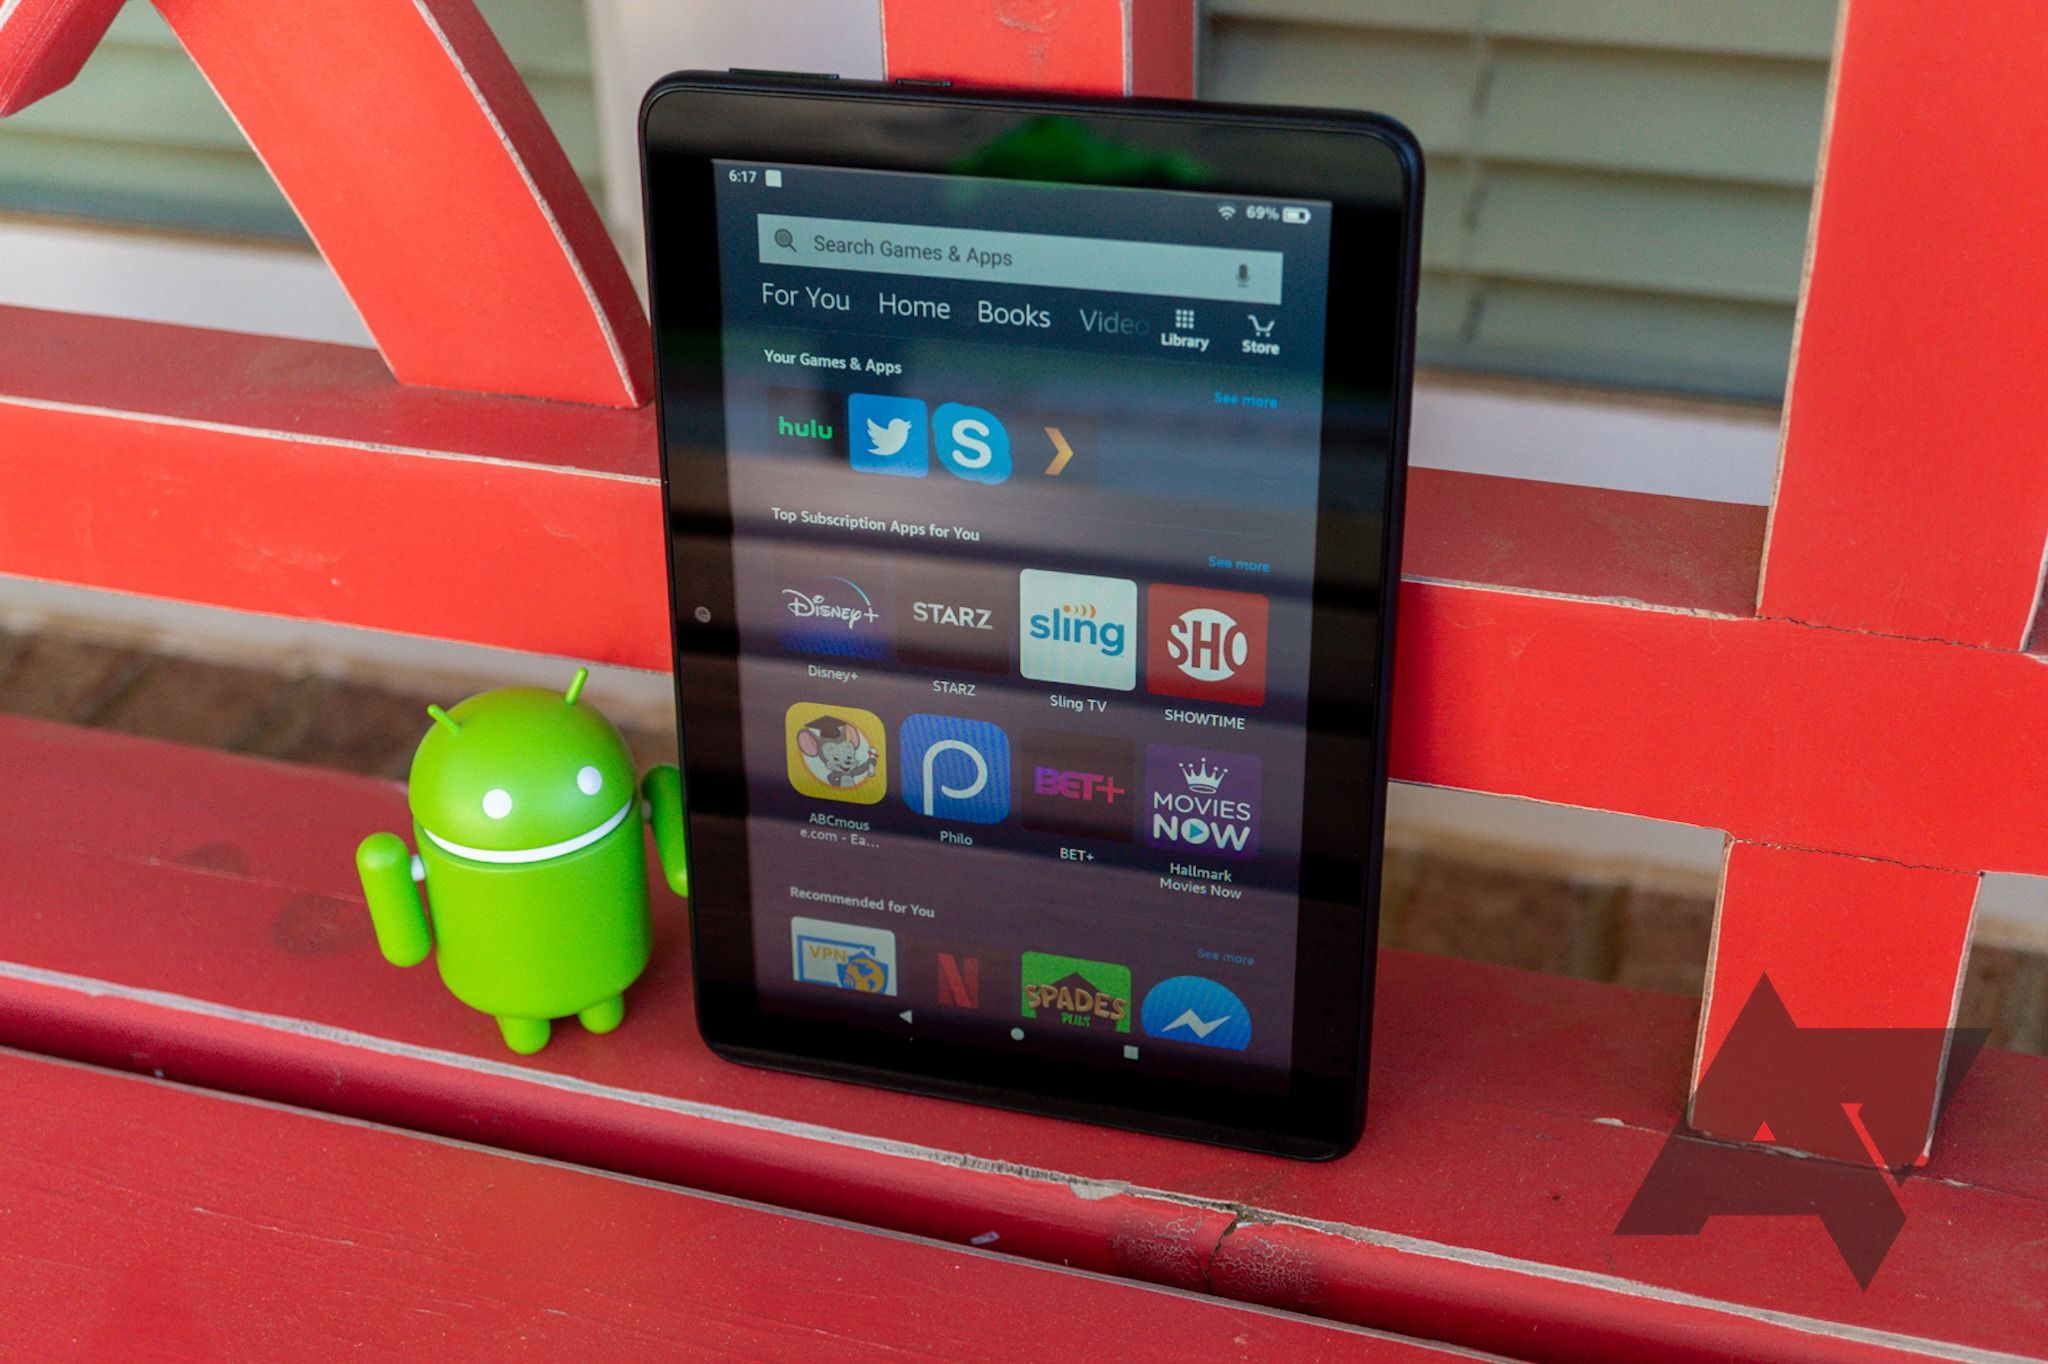 Amazon Fire tablet on a red bench, next to a green Android figurine  